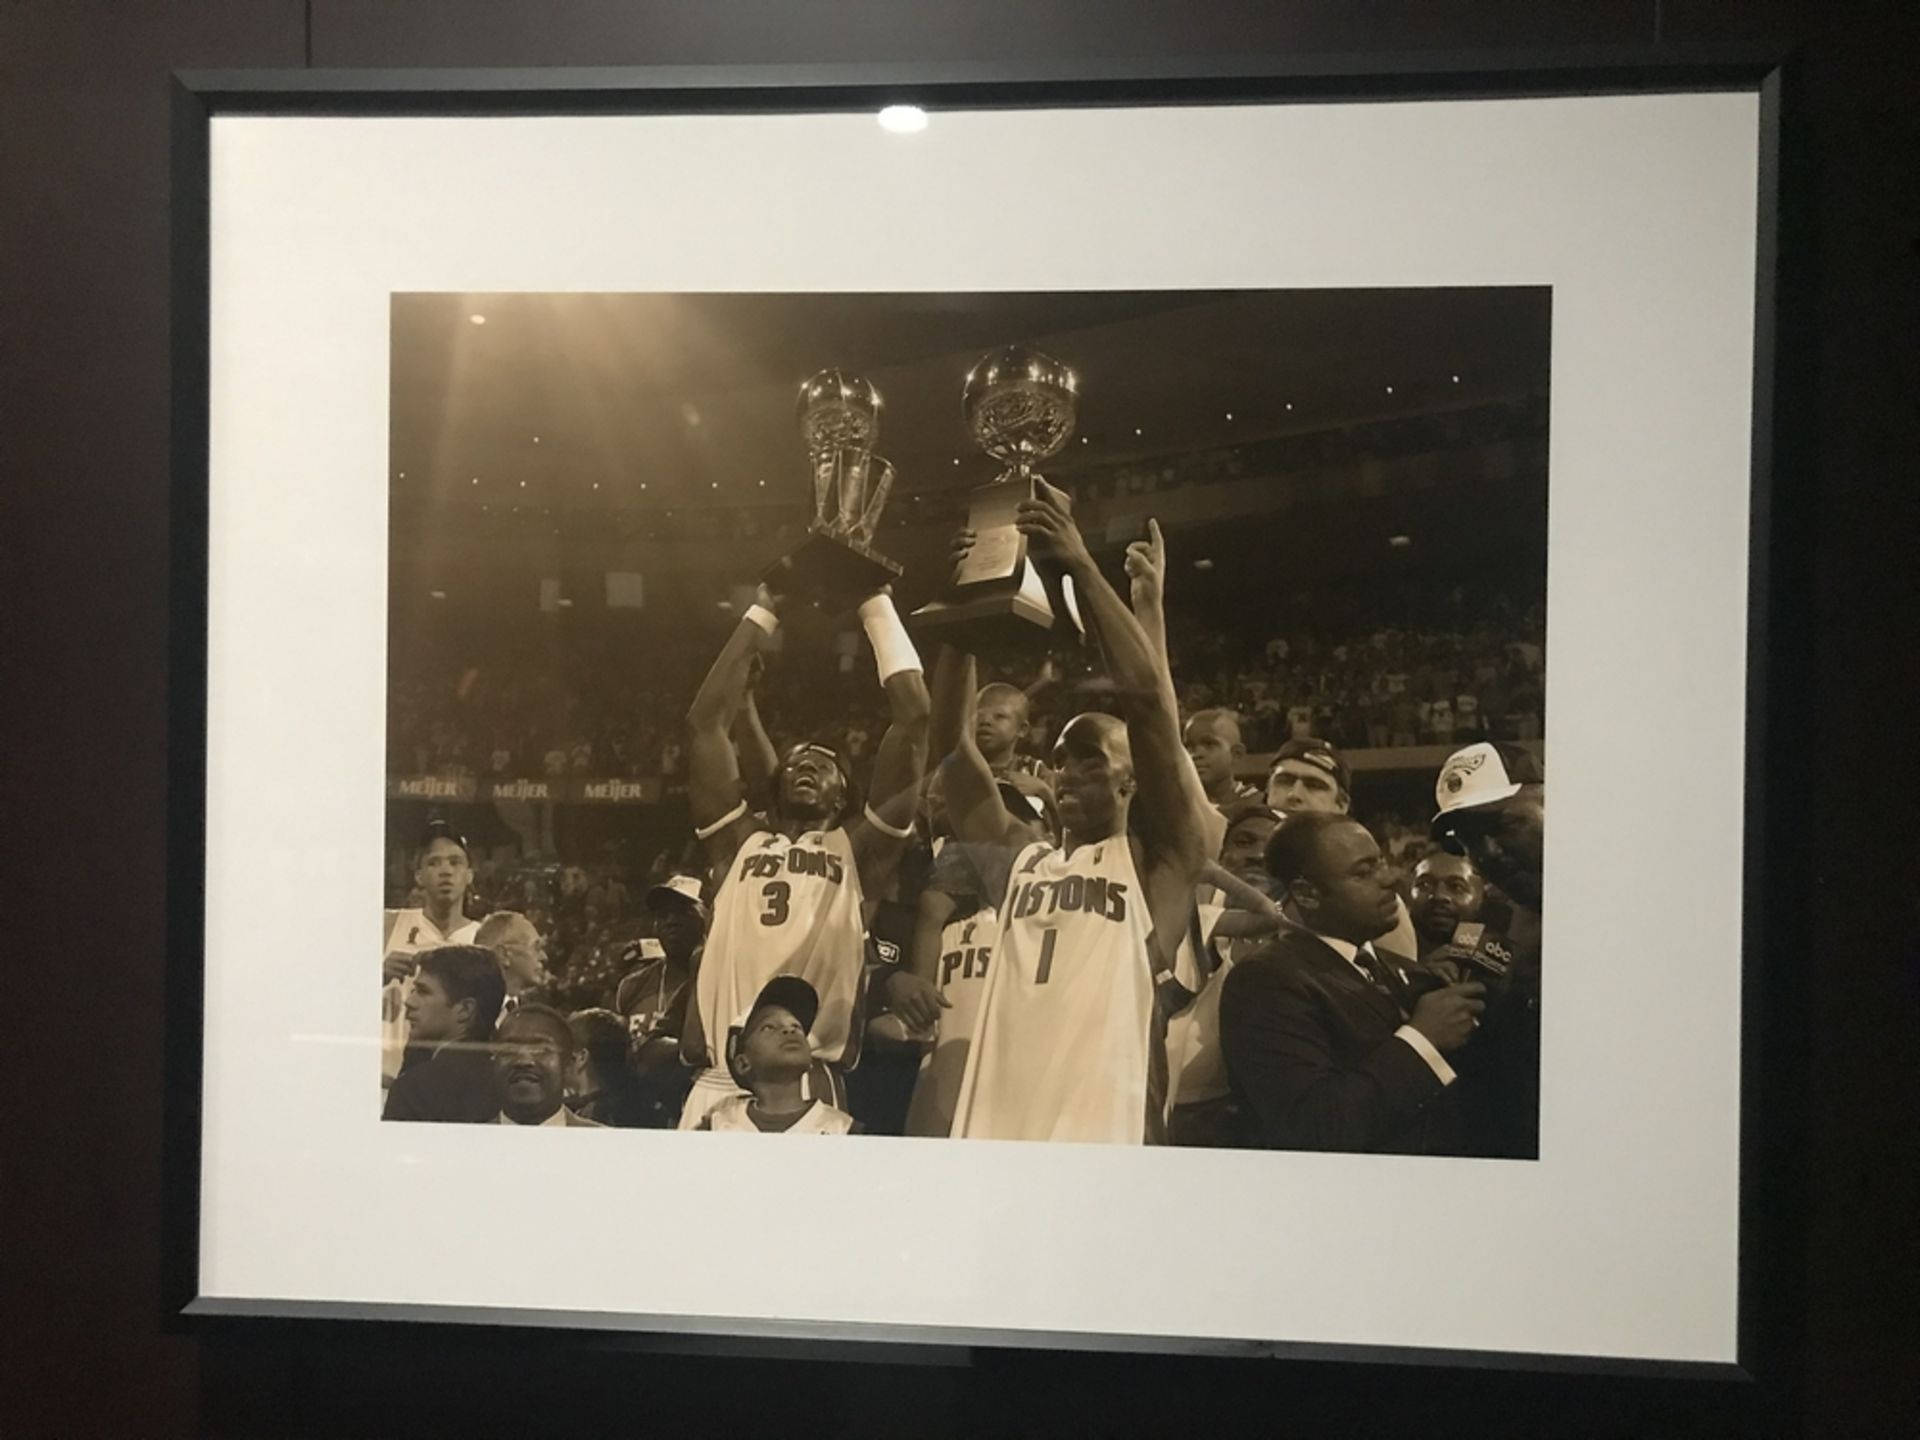 Picture Framed & Matted "Ben Wallace & Chauncey Billups" , Dim. 42 in x 34 in , Location: Court Side